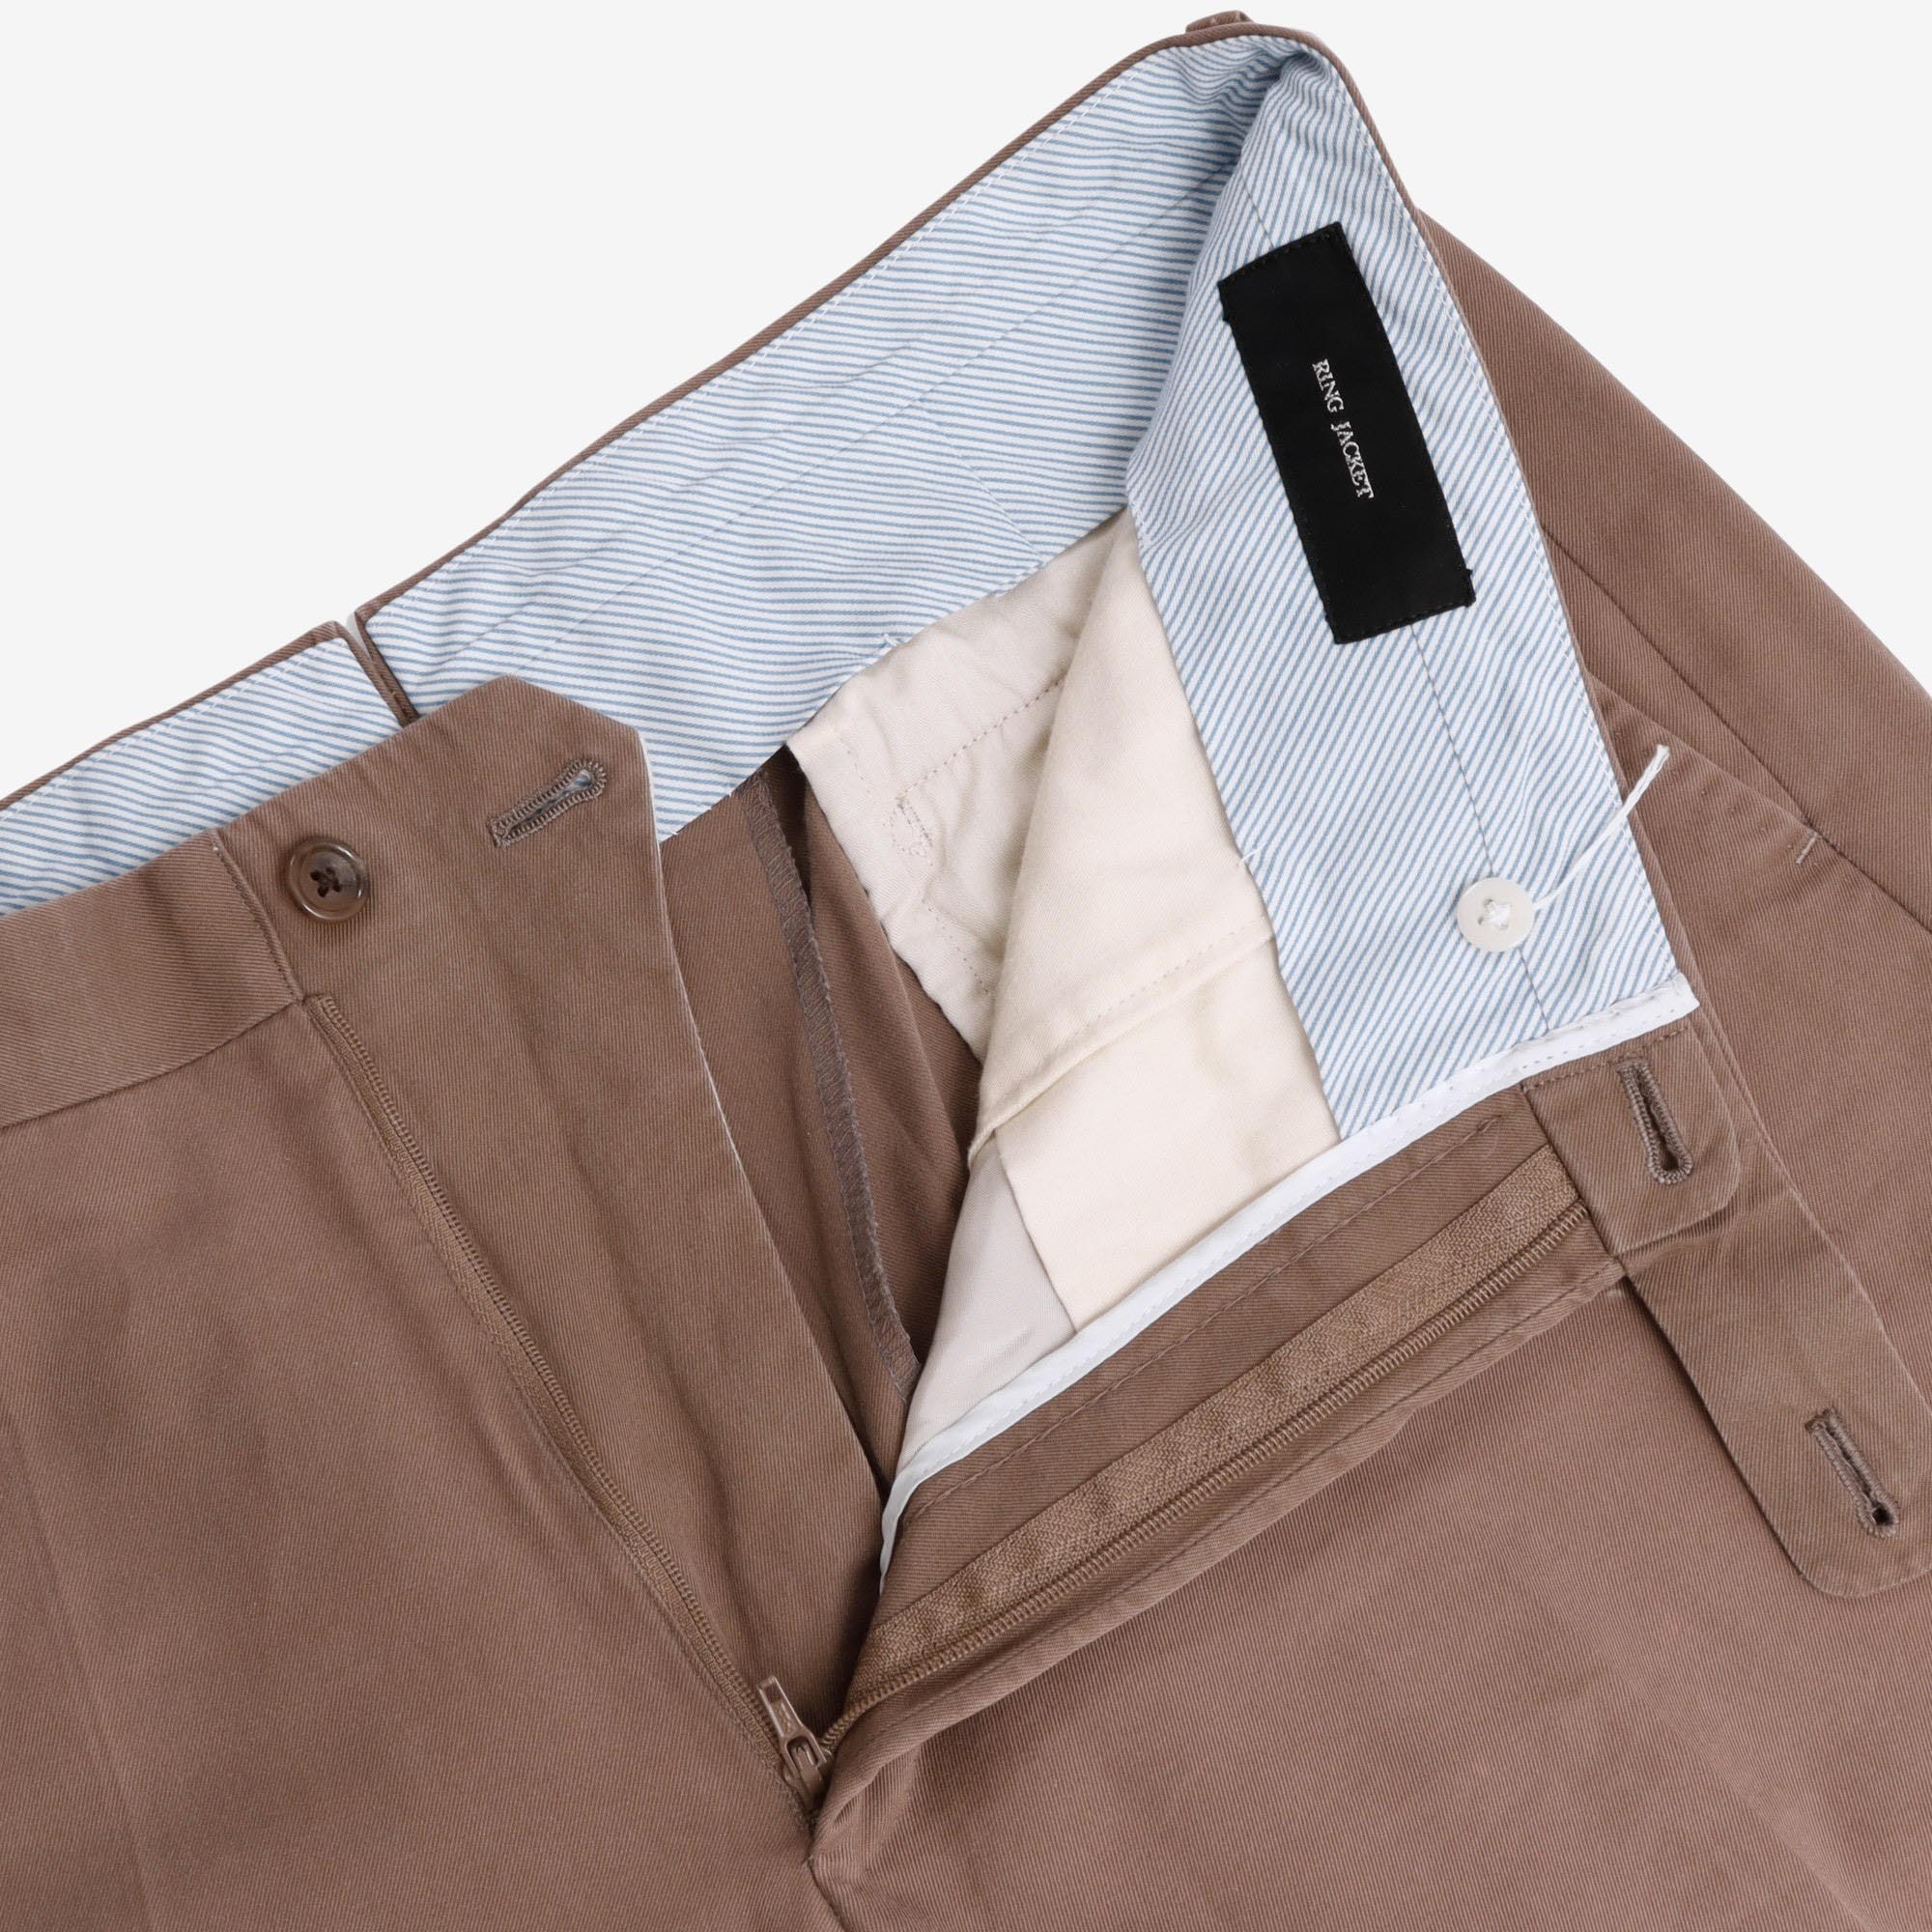 Model A Chinos